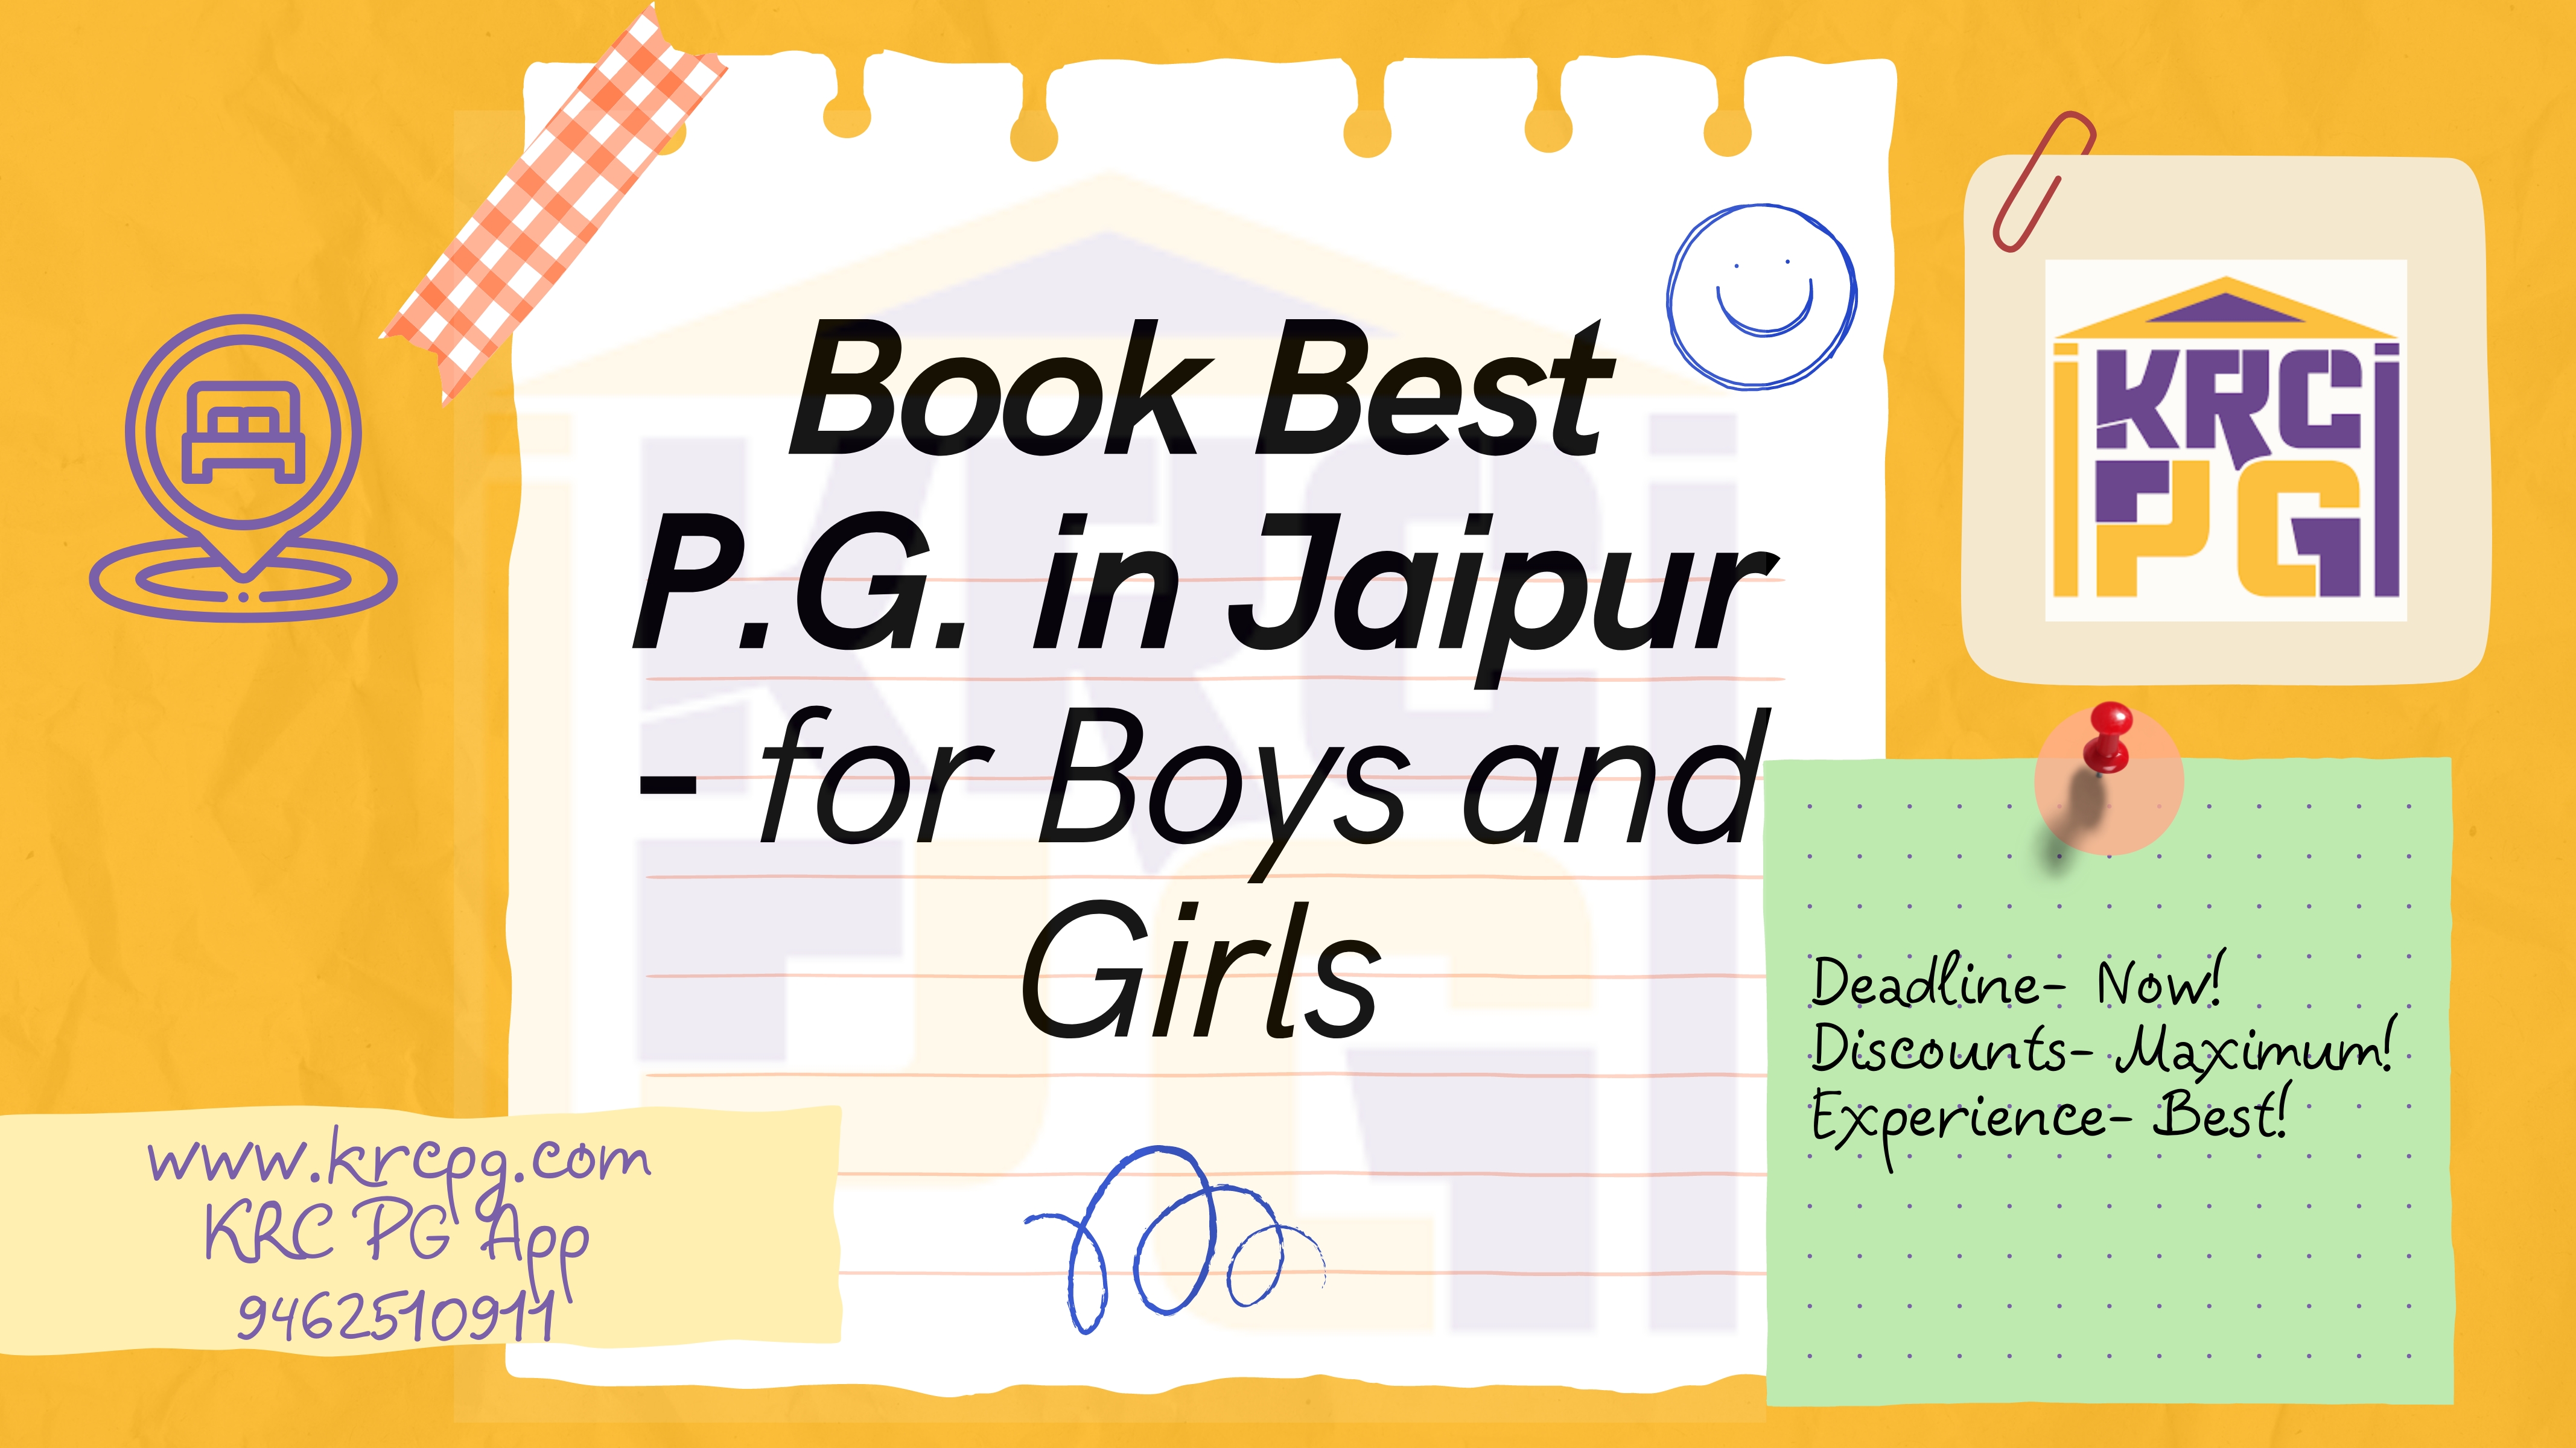 BOOK BEST P.G. IN JAIPUR – For Boys and Girls